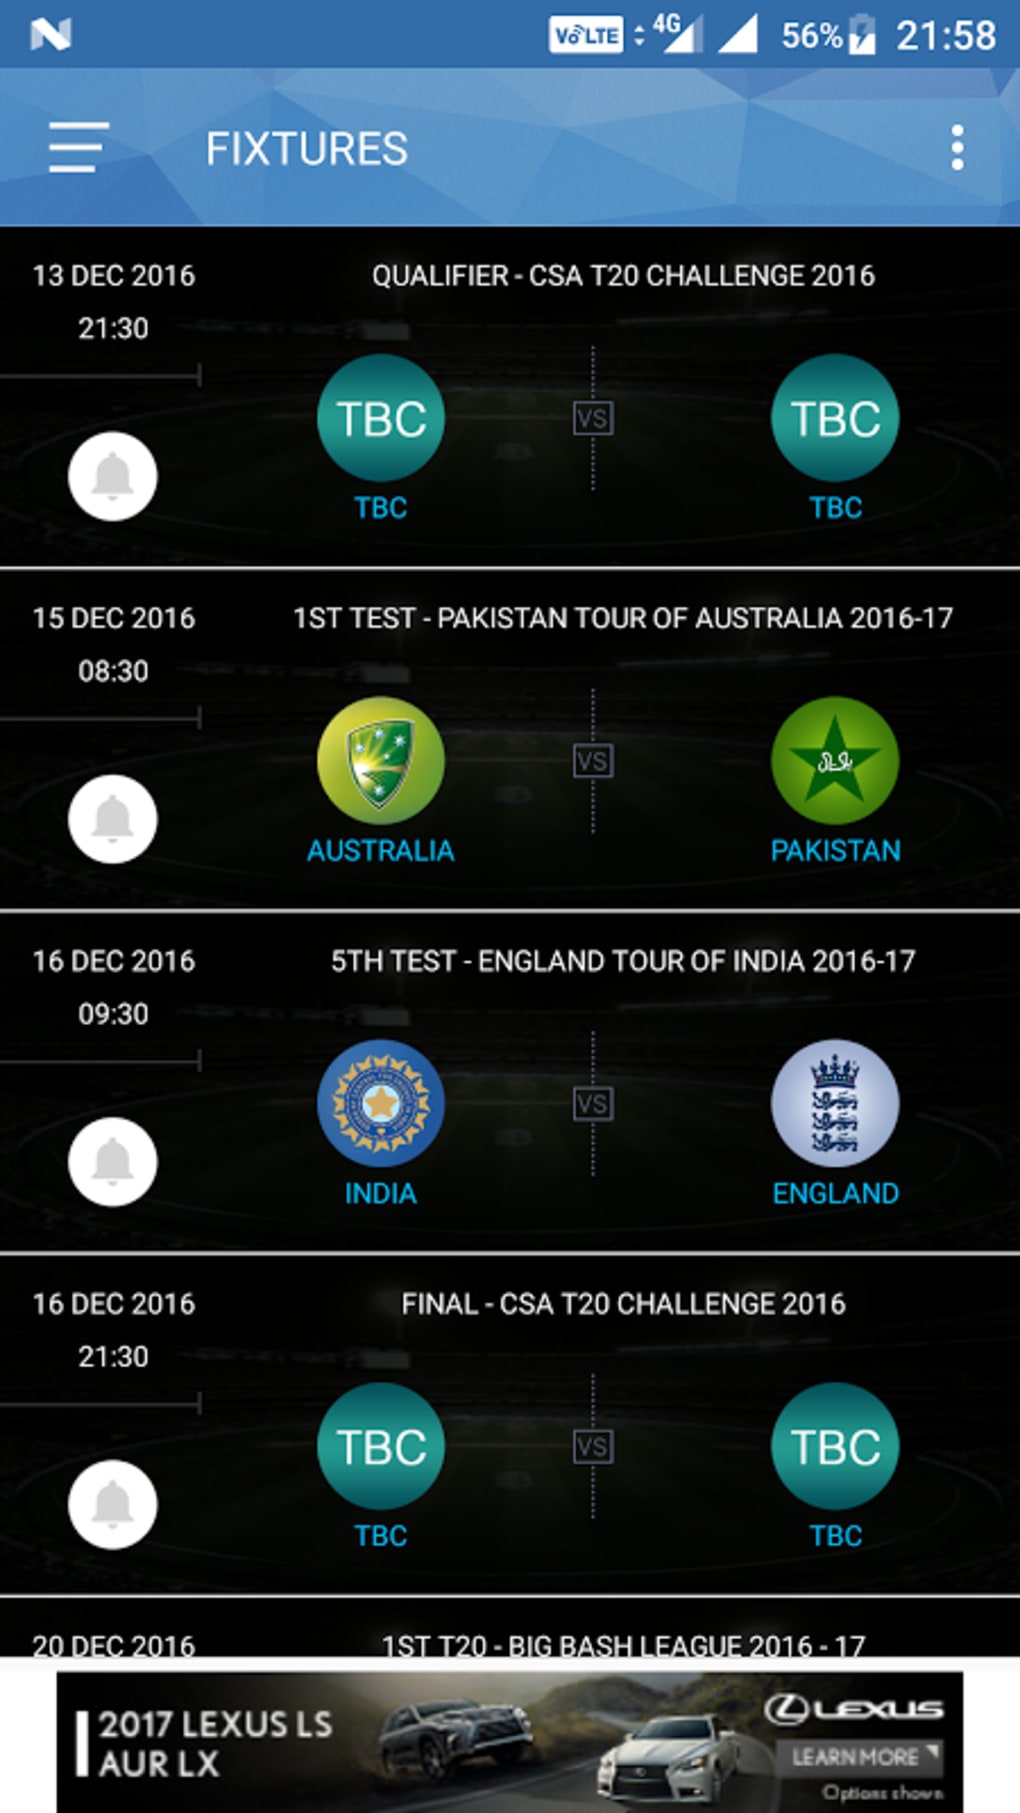 watch live cricket on android